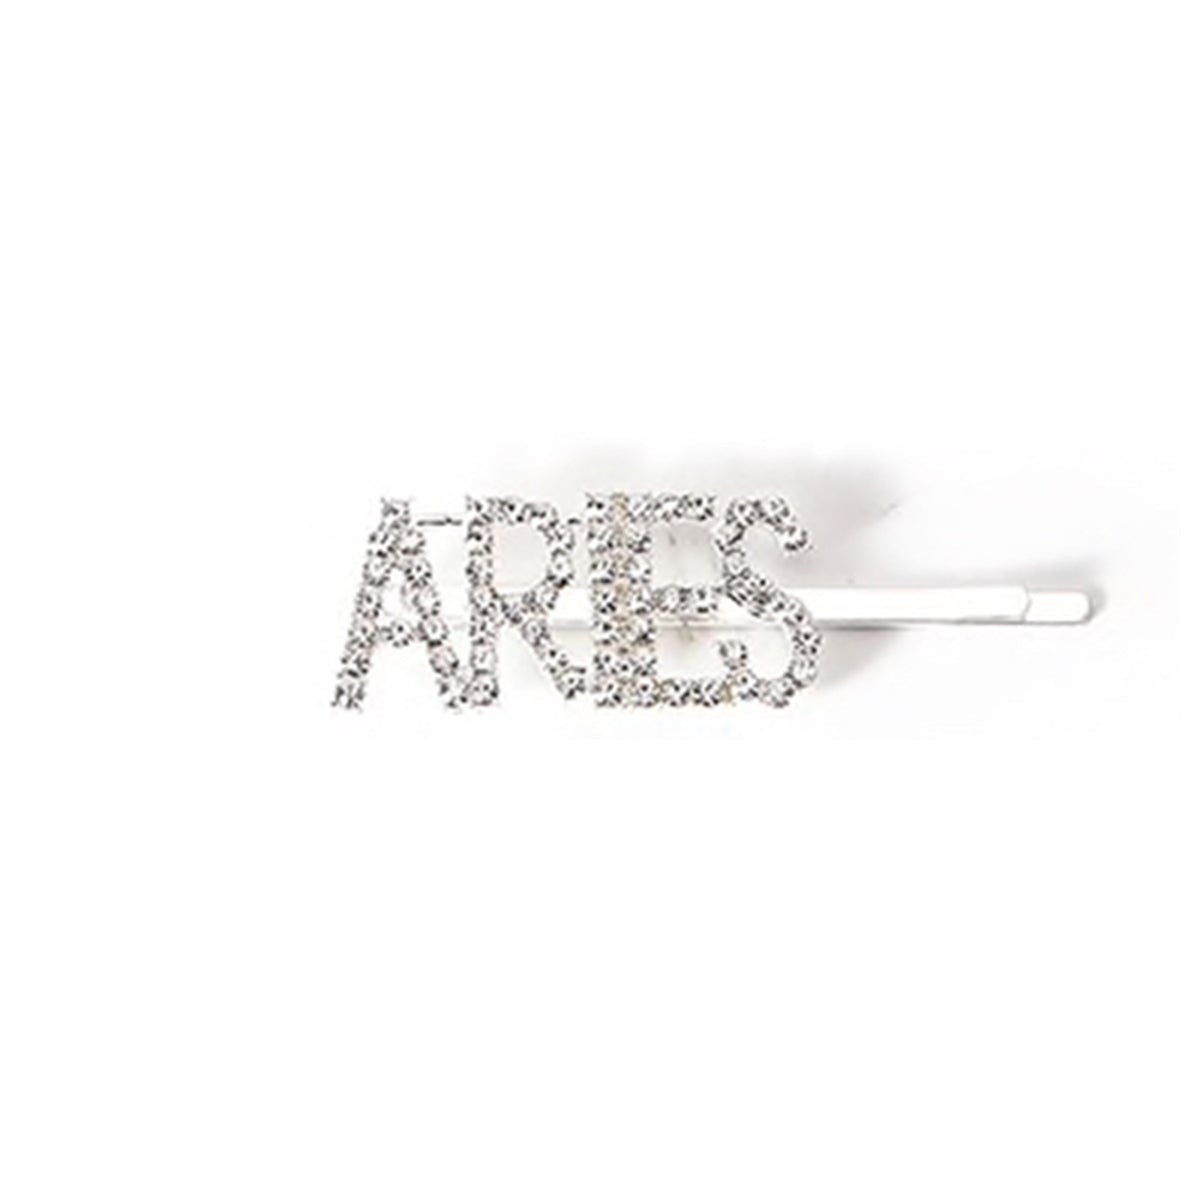 Aries Crystal Hair Clip zodiac jewelry for her birthday outfit